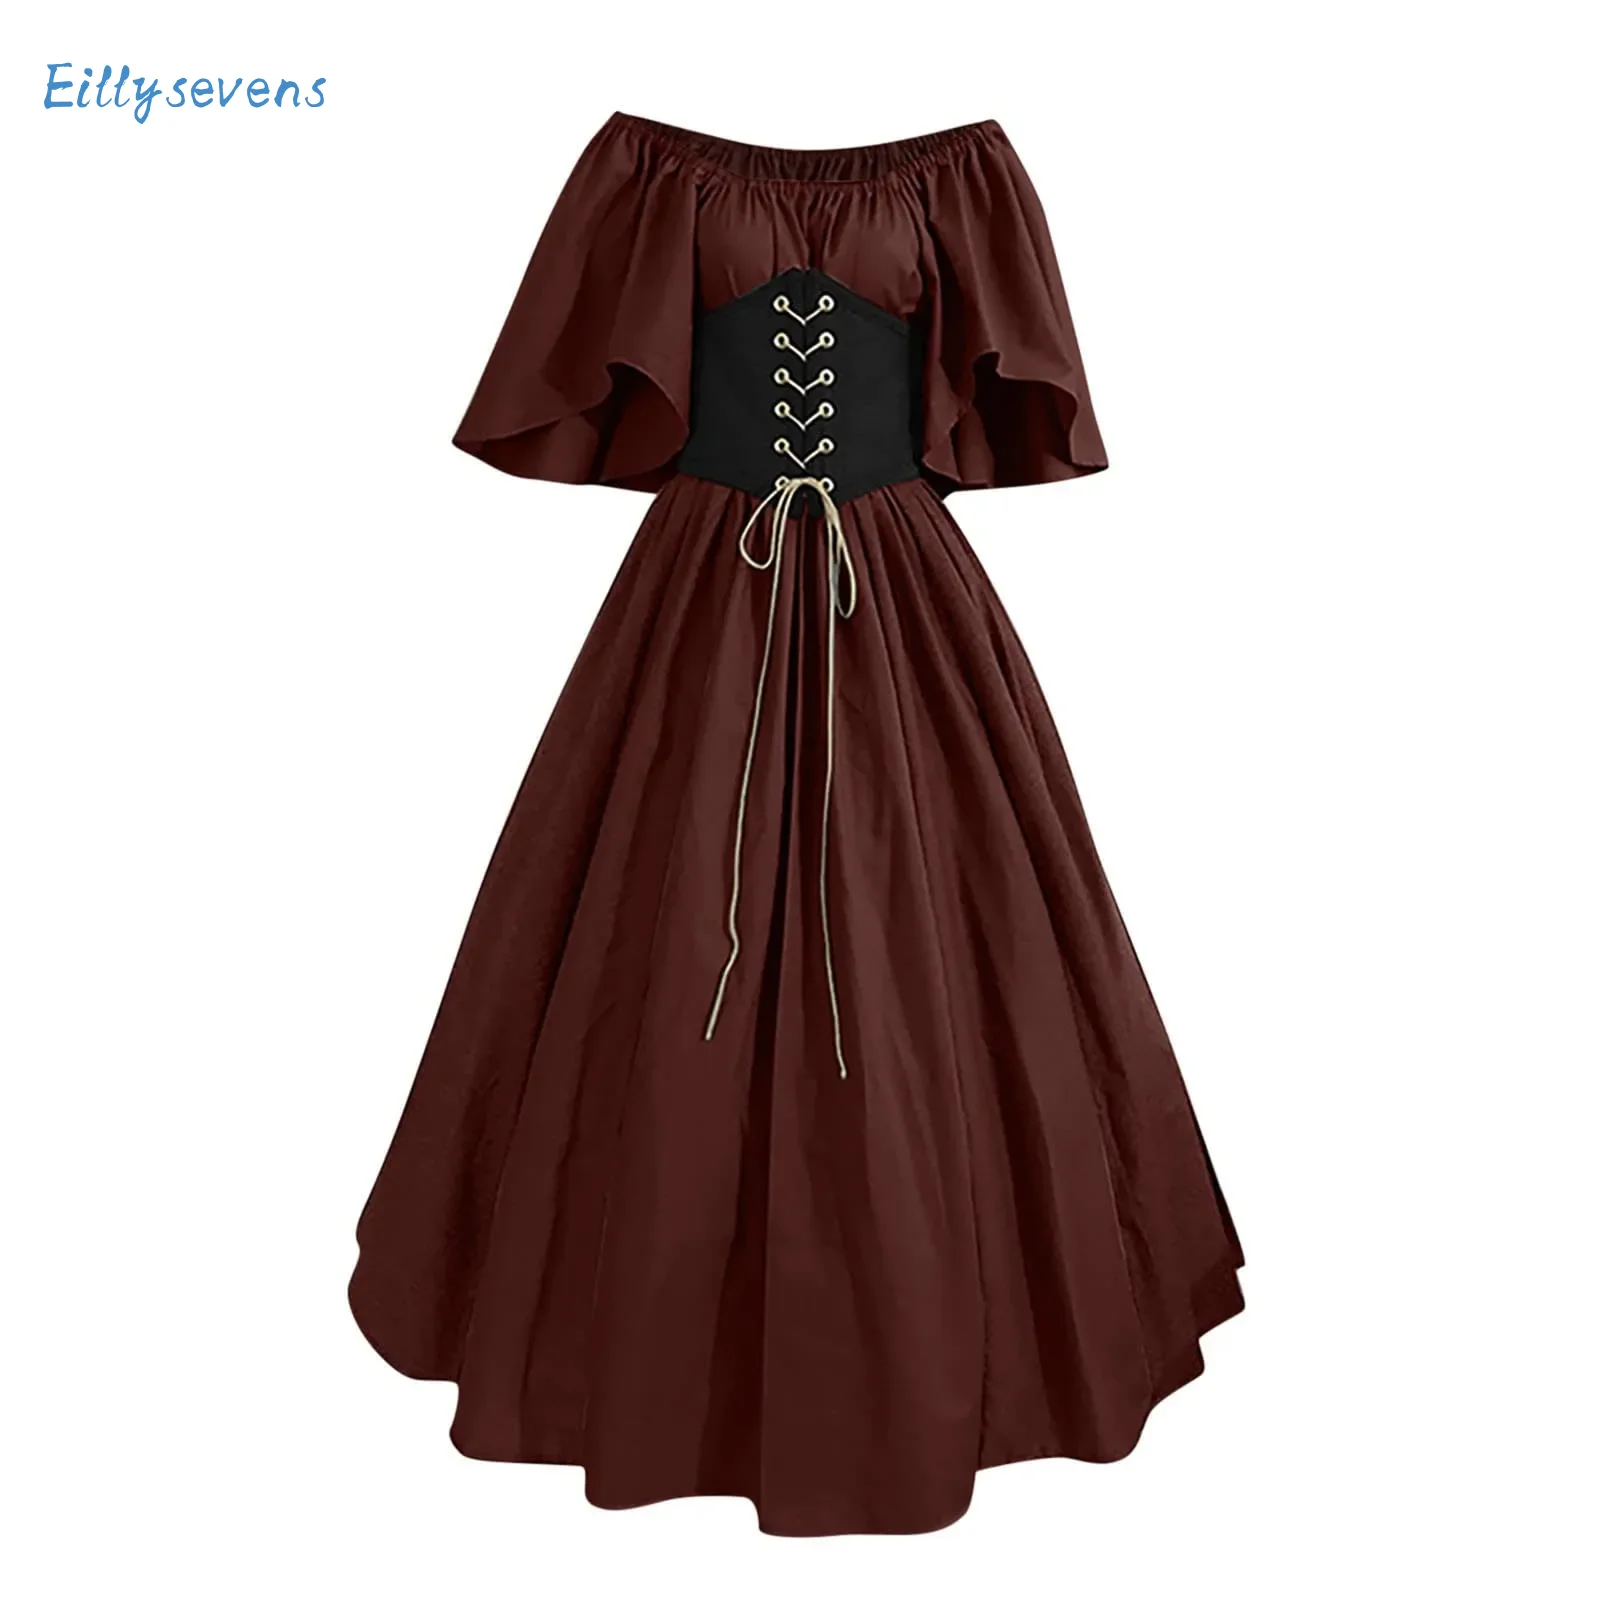 

Medieval Retro Dresses Trend Matching Color Slim Fitting Skirt With Flying Sleeves Large Swing Skirt One Shoulder Dress